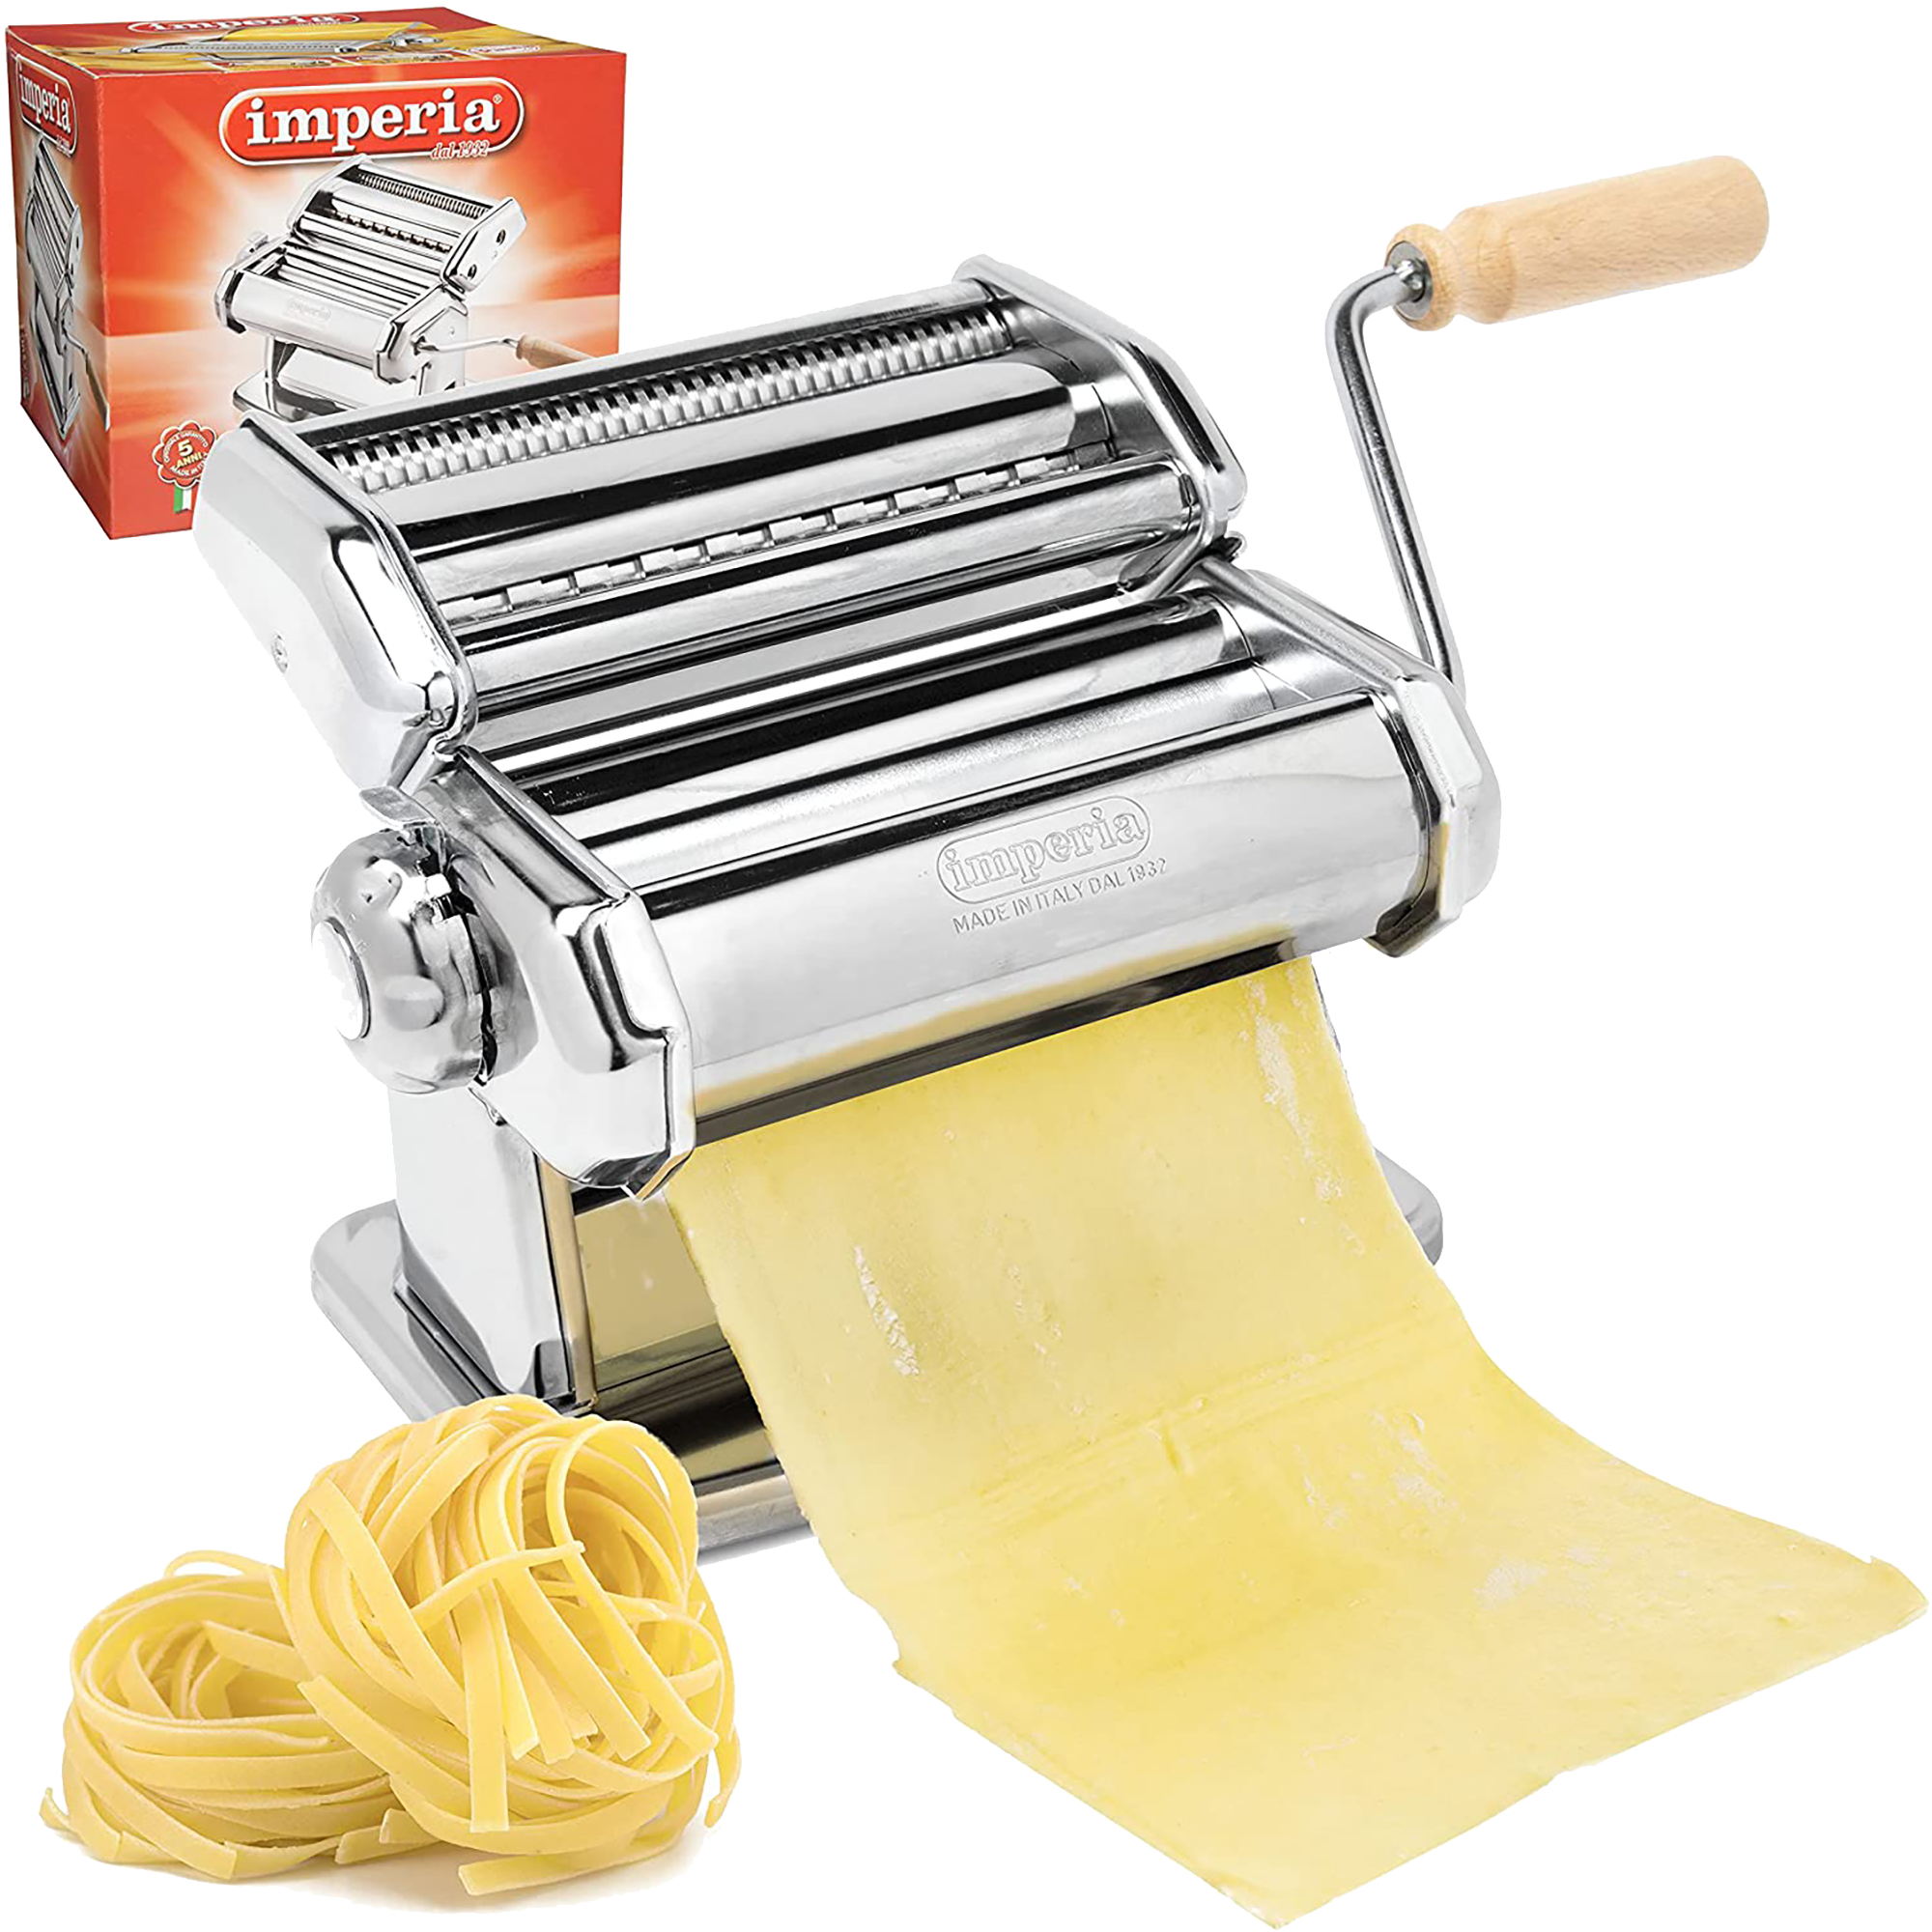 https://gsolutions.tv/wp-content/uploads/2022/06/Imperia-Manual-Pasta-Sheeter-Chrome.png